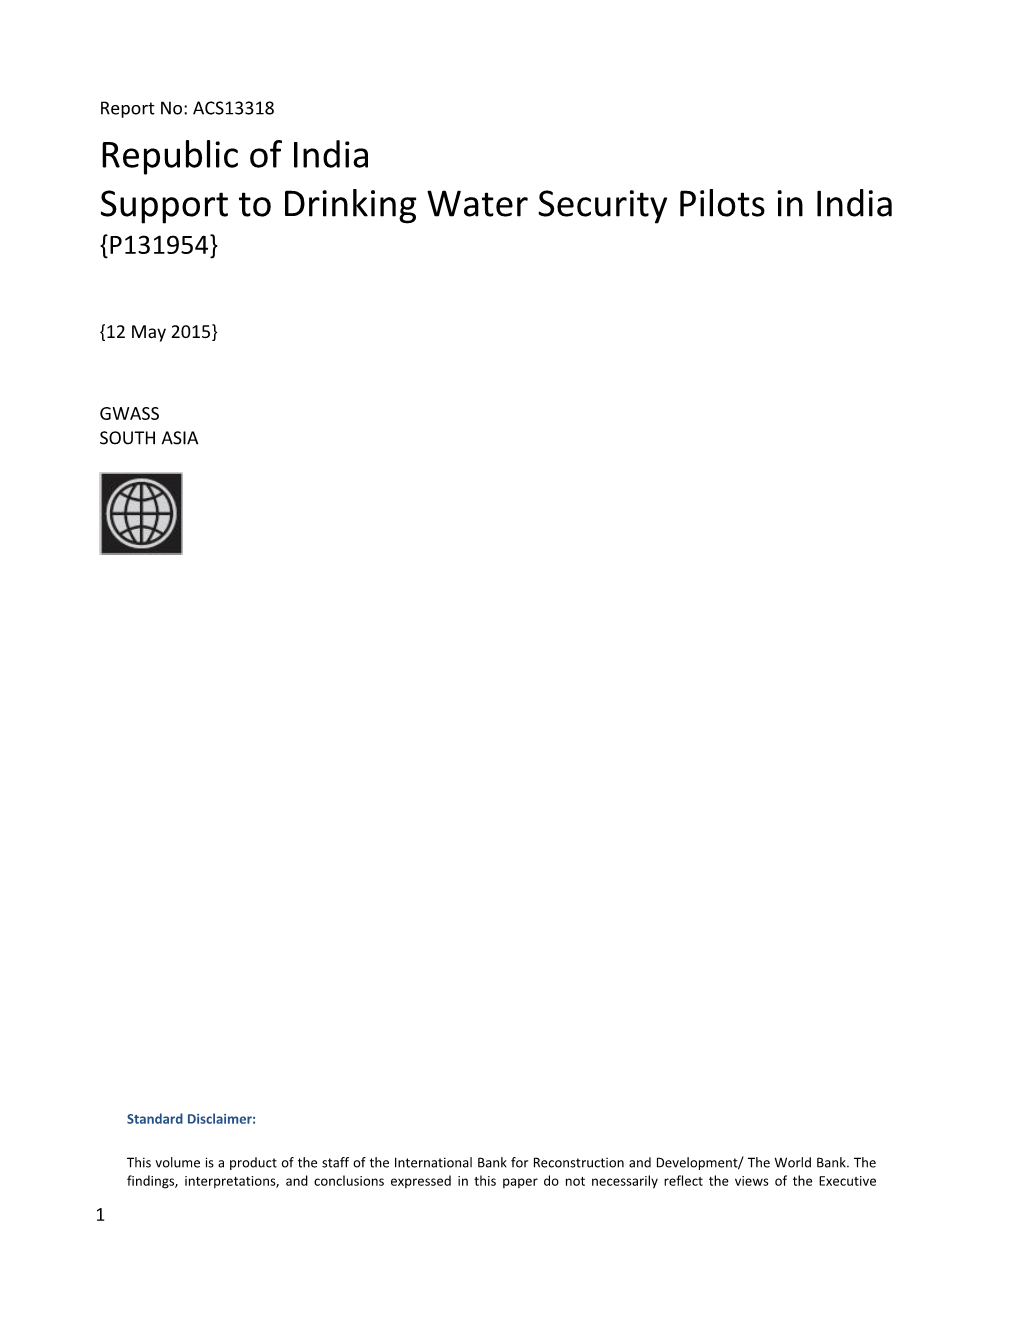 1.2Setting up a Drinking Water Security Pilot